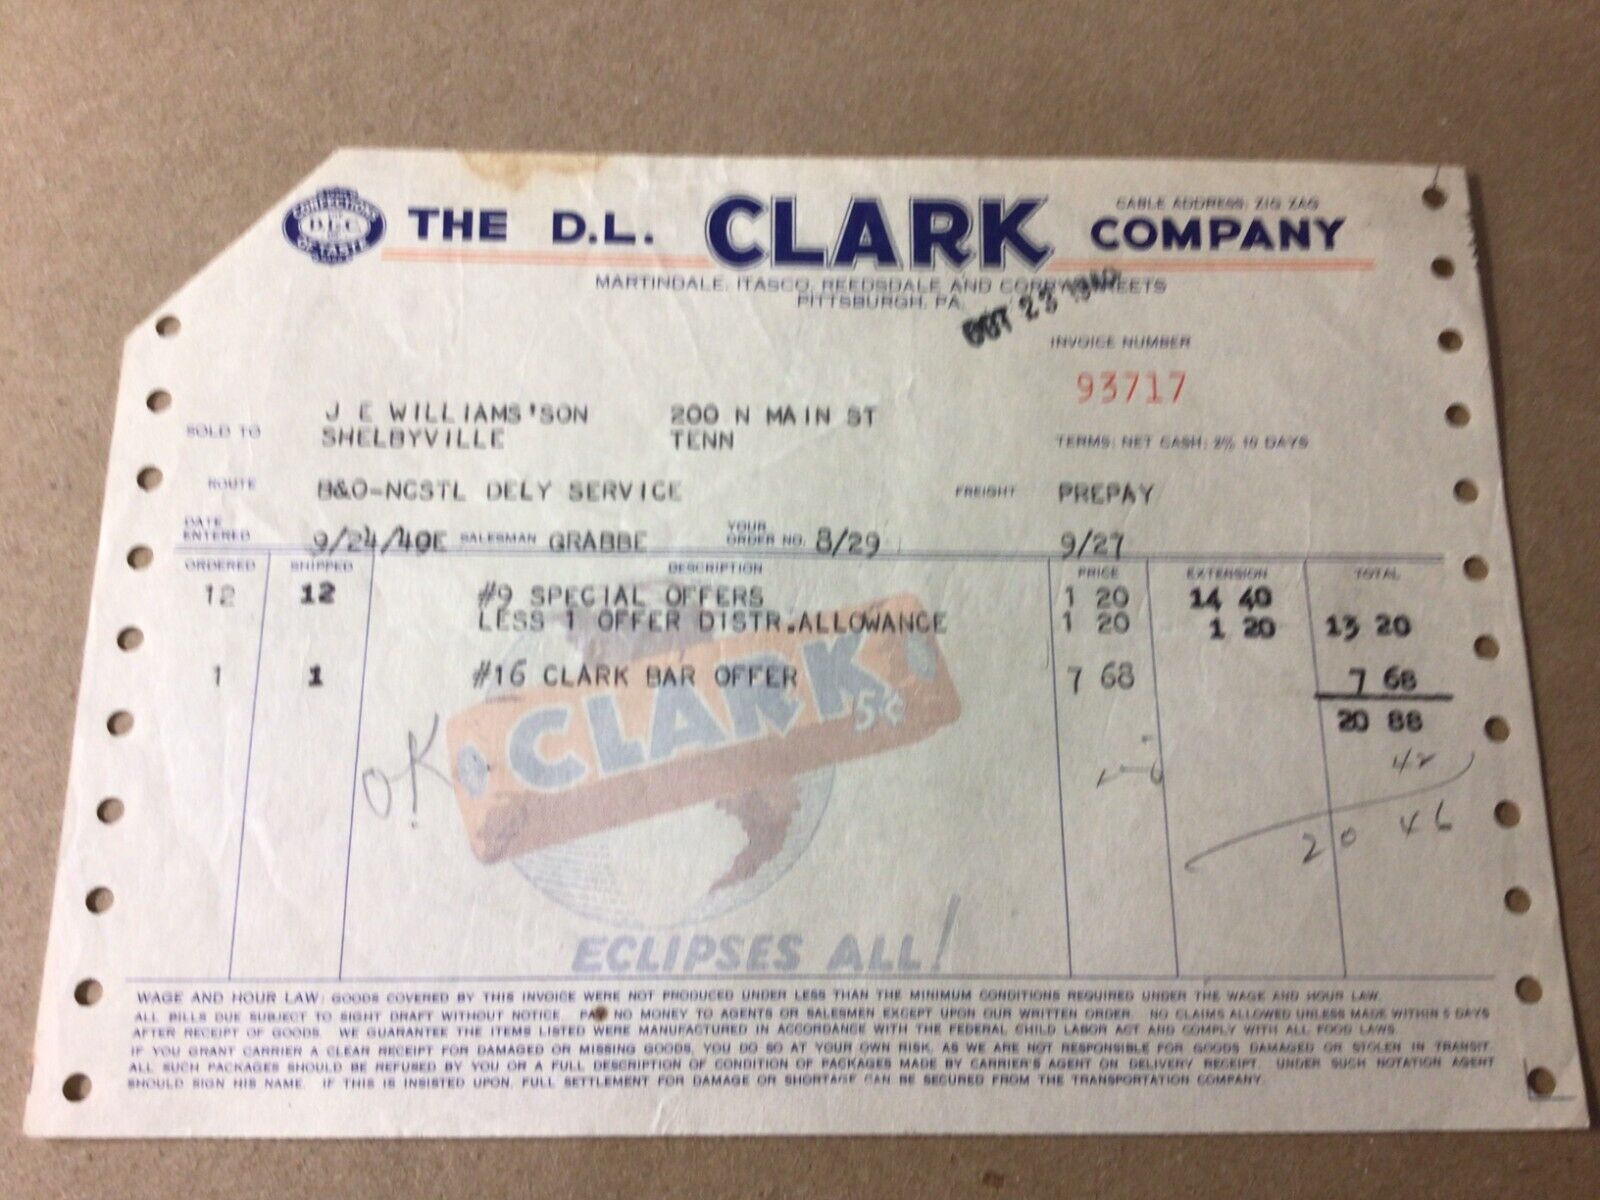 D. L. Clark Candy Bar Company Pittsburgh, Pa. 1940 Invoice  Confections of Taste